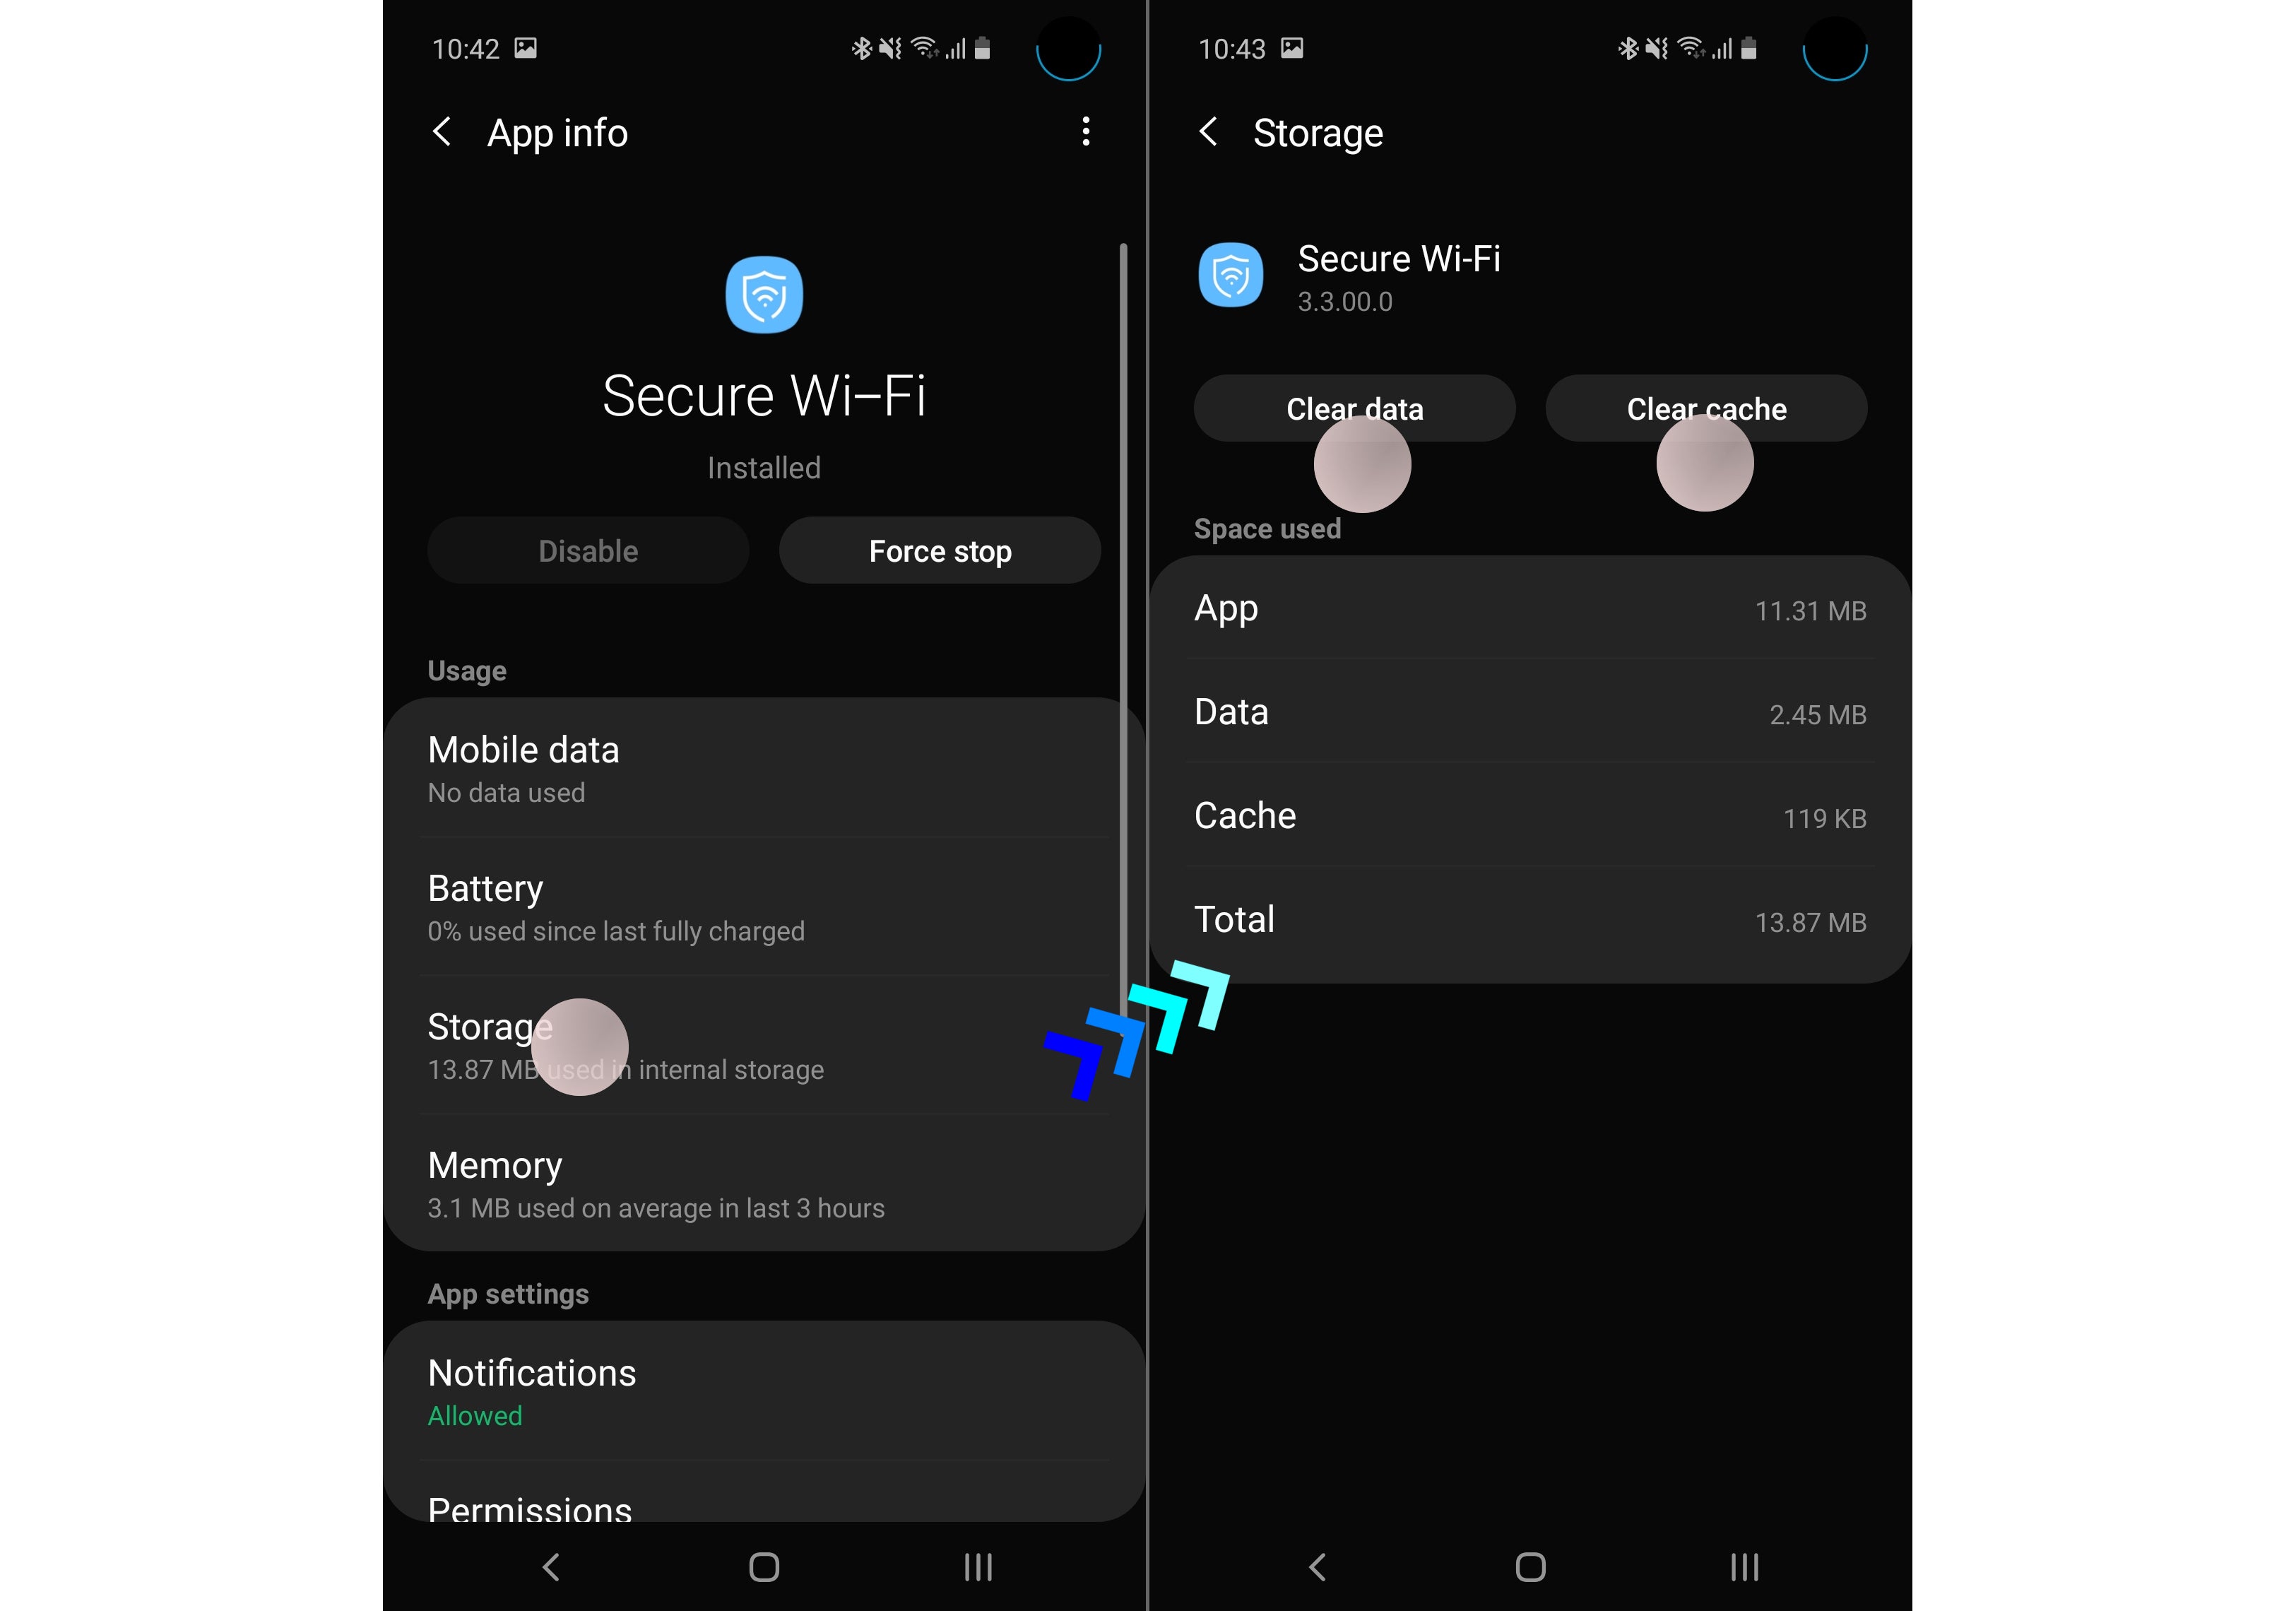 How to disable the annoying Secure Wi-Fi on the Samsung Galaxy S10